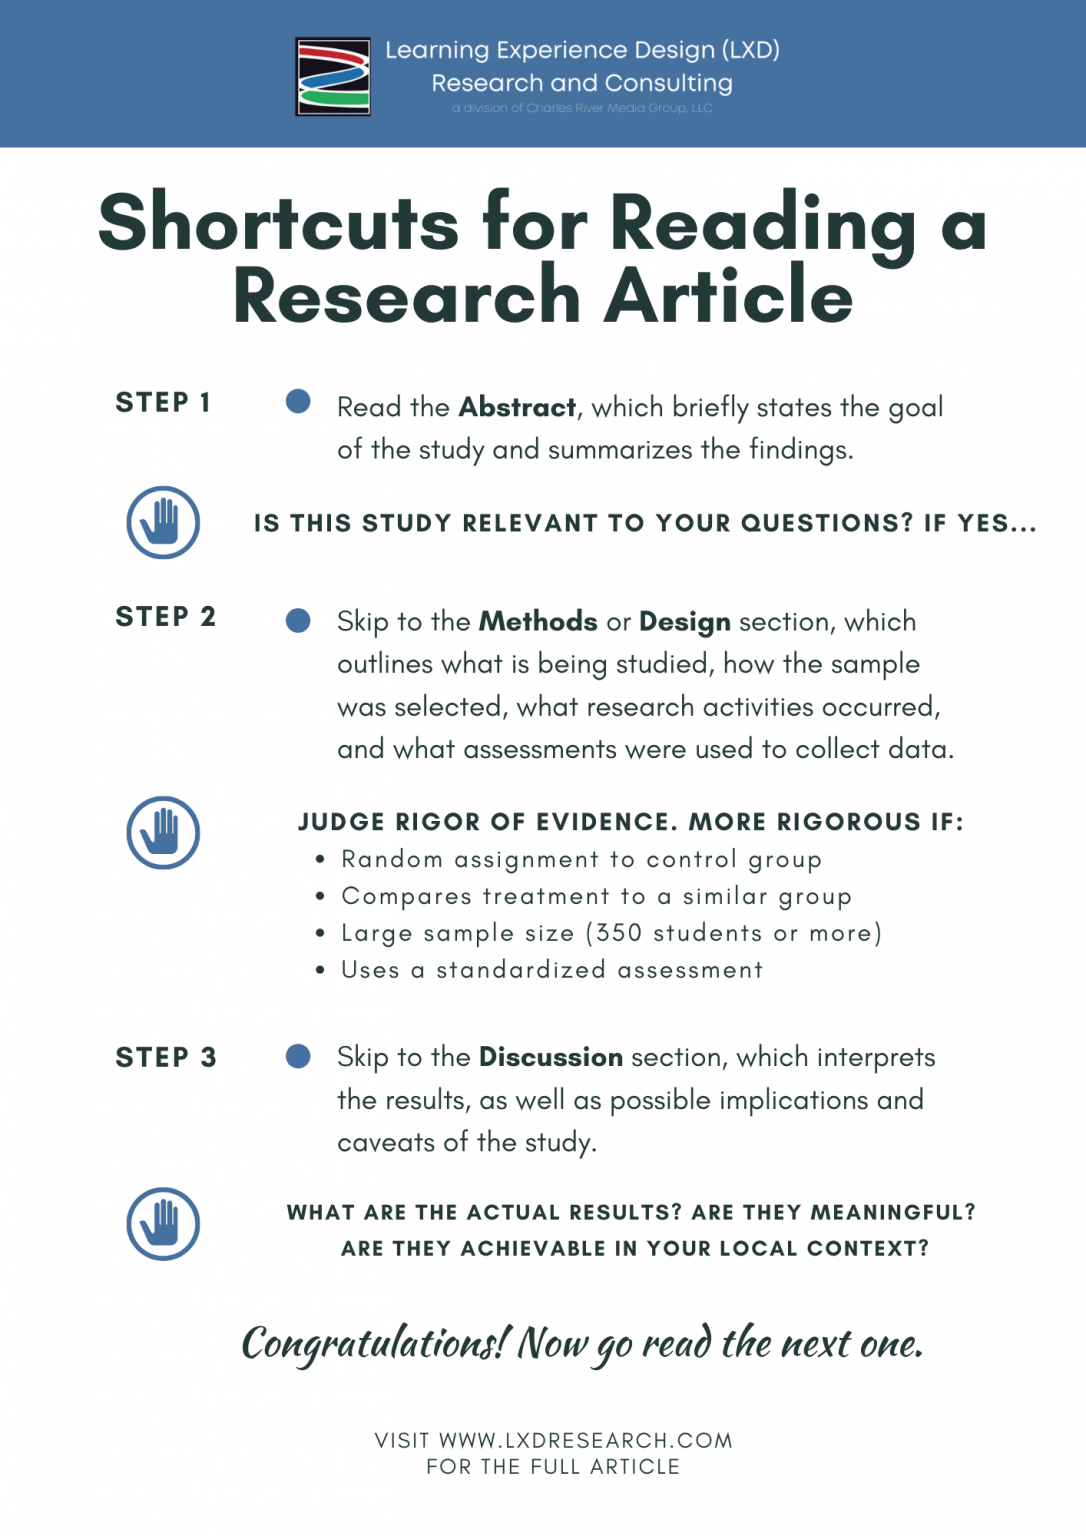 guided reading research articles